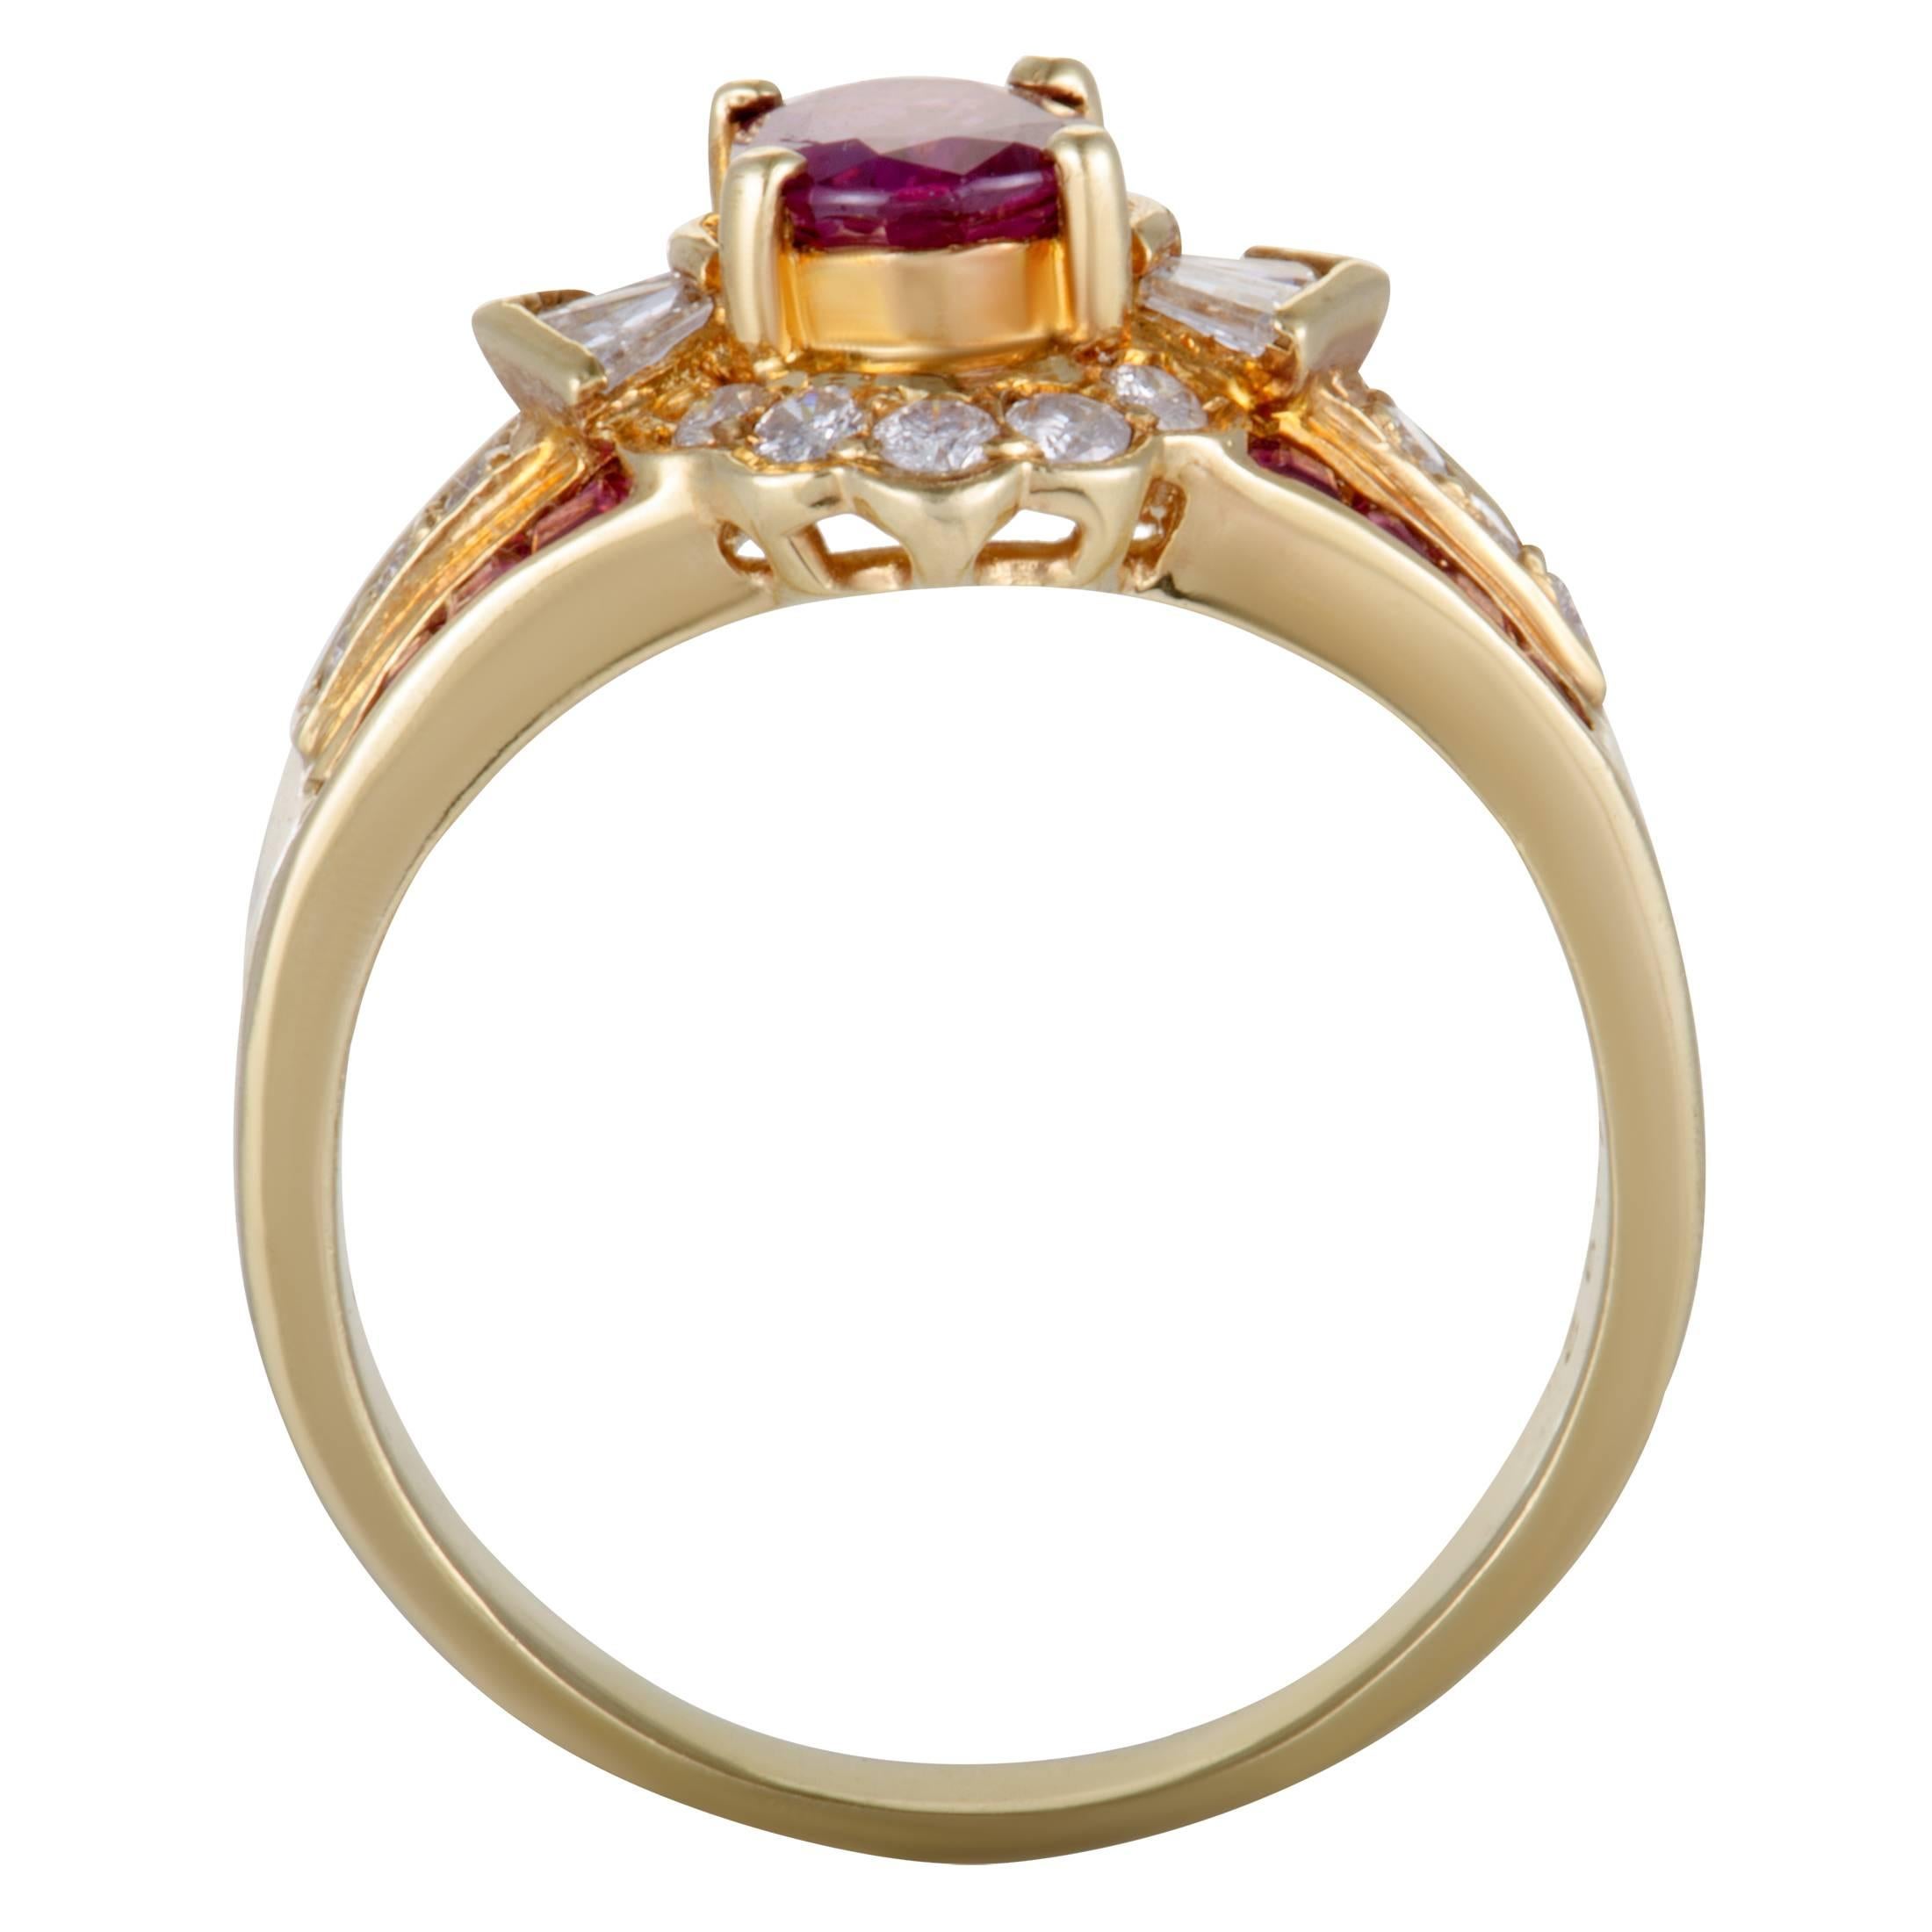 The alluring radiance of 18K yellow gold and the compelling tone of rubies give a delightfully feminine appeal to this extravagant ring that is also set with scintillating diamond stones. The rubies weigh 1.42 carats in total, while the diamonds